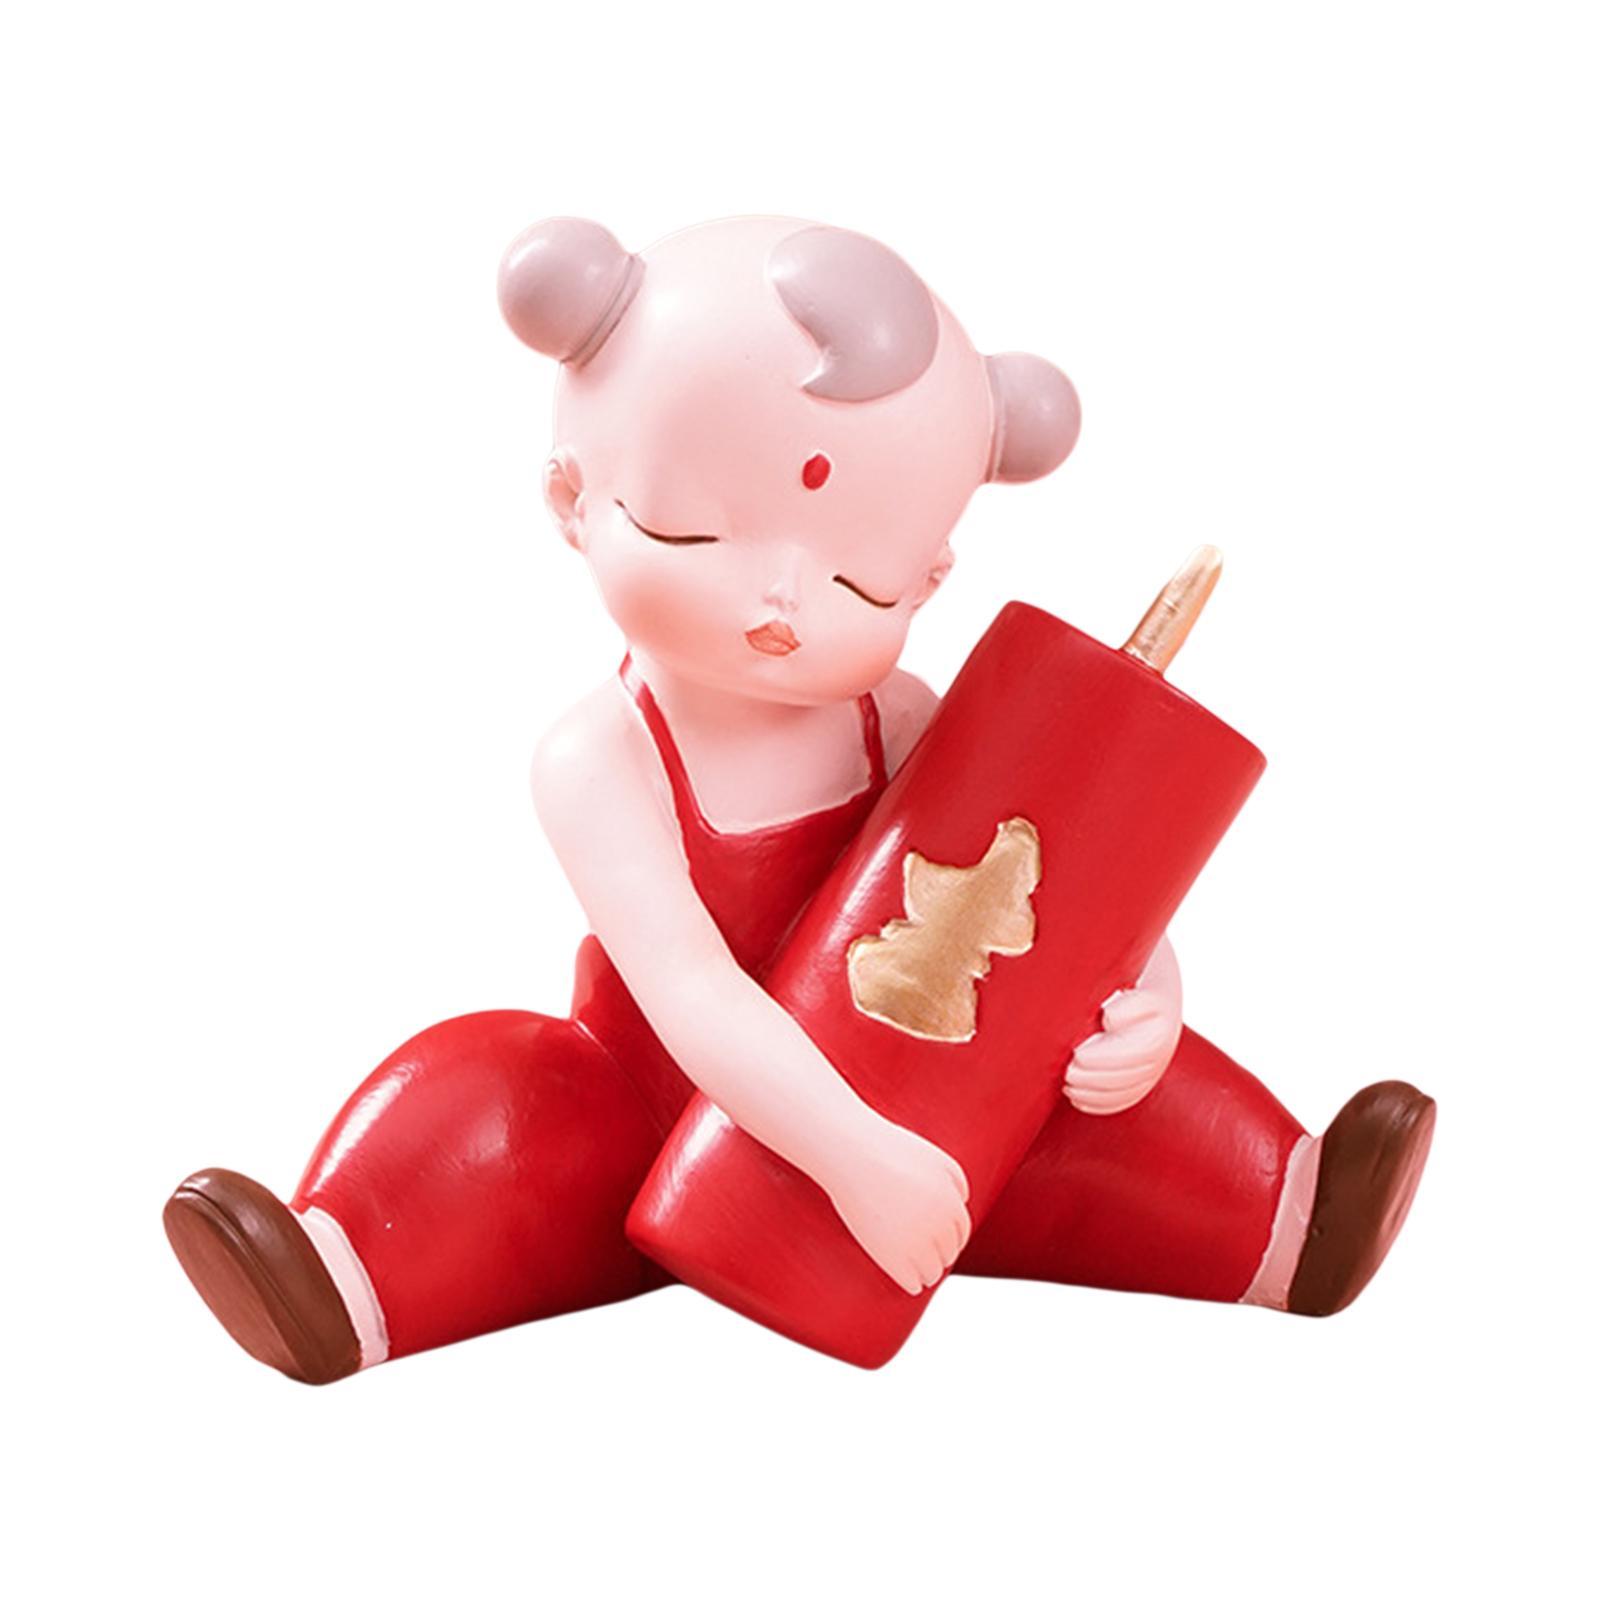 Chinese New Year Lucky Kids Ornaments Sculpture Decor for Office Decoration Boy